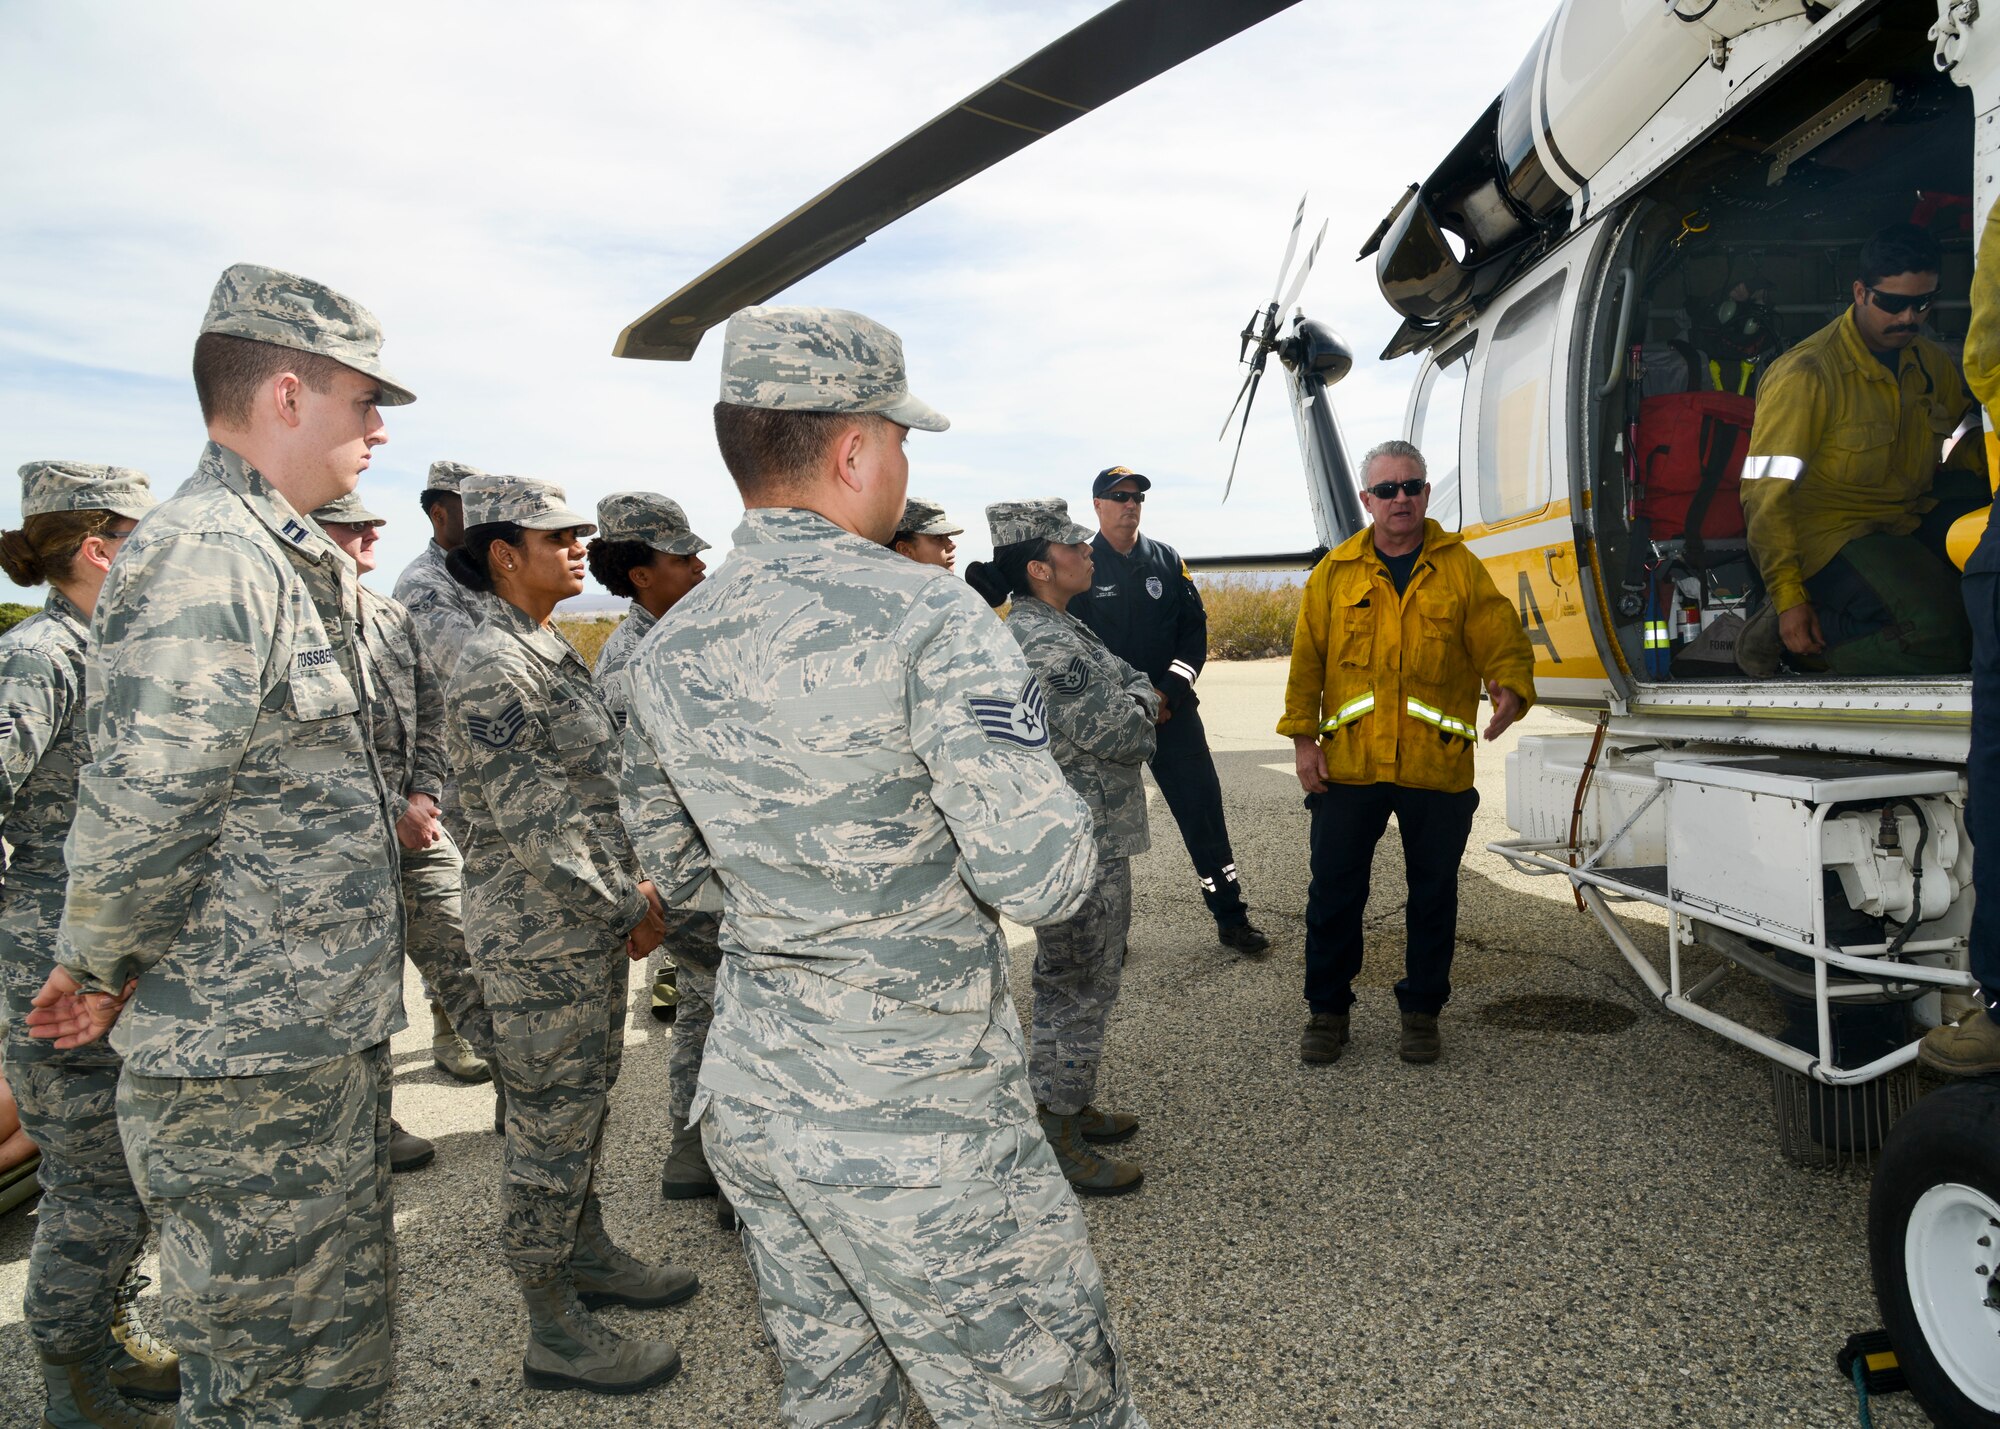 Members of a helicopter crew from the Los Angeles County Fire Department provide helicopter familiarization to Airmen from the 412th Medical Group during a training event at Edwards Air Force Base, California, Nov. 1. Interagency training allows the Airmen to be familiar with the helicopter, its crew and proper medevac standard operating procedures as Edwards AFB does not have native air medevac capabilities. (U.S. Air Force photo by Giancarlo Casem)